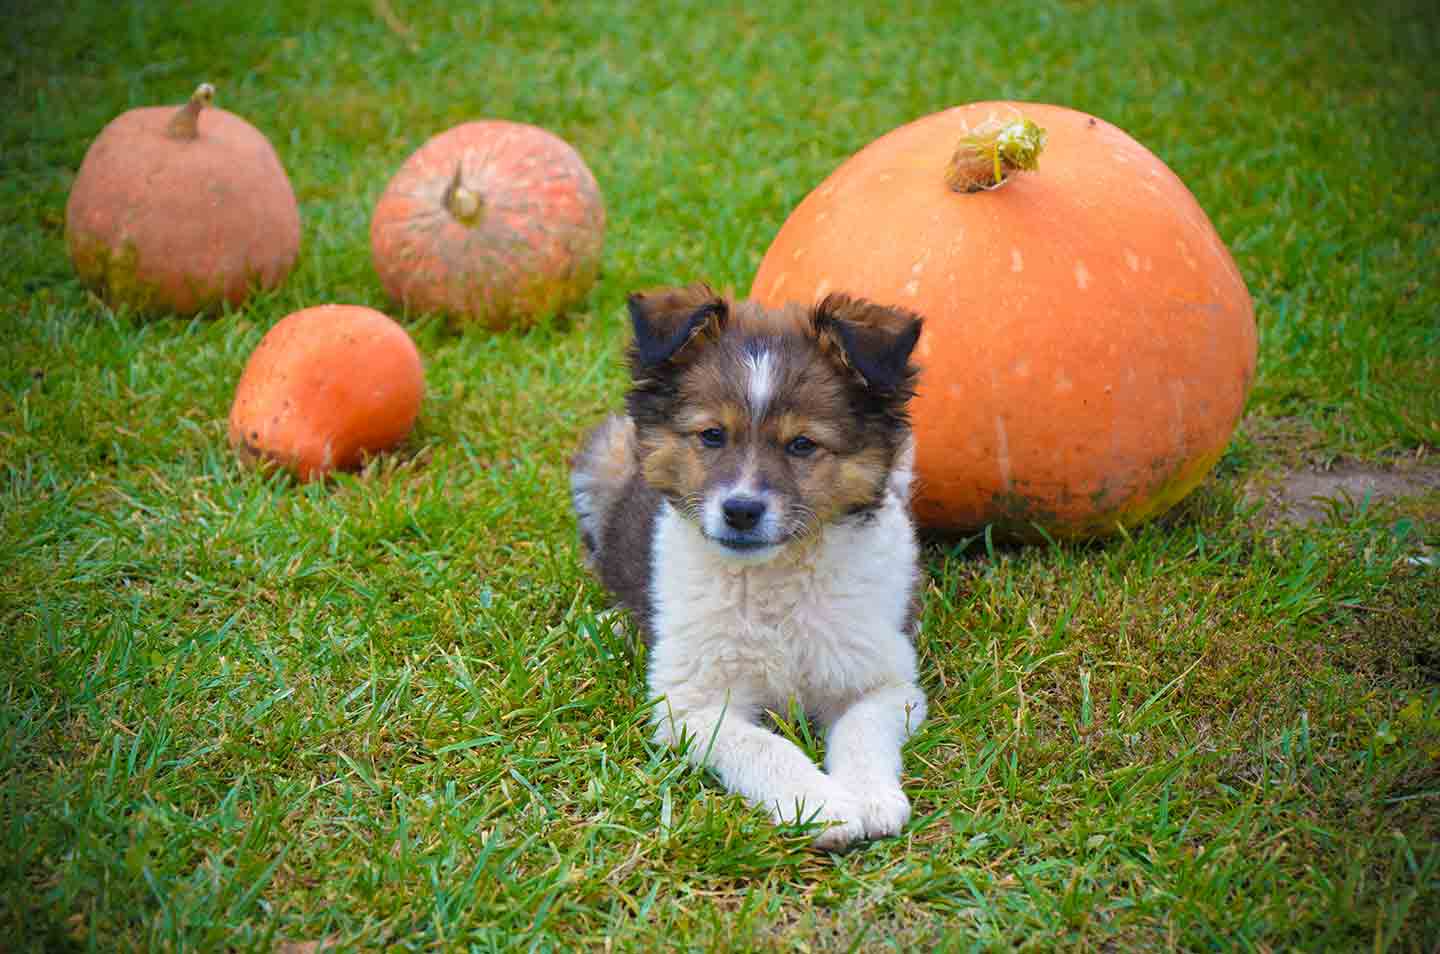 Photo of a dog laying on grass with pumpkins in the background